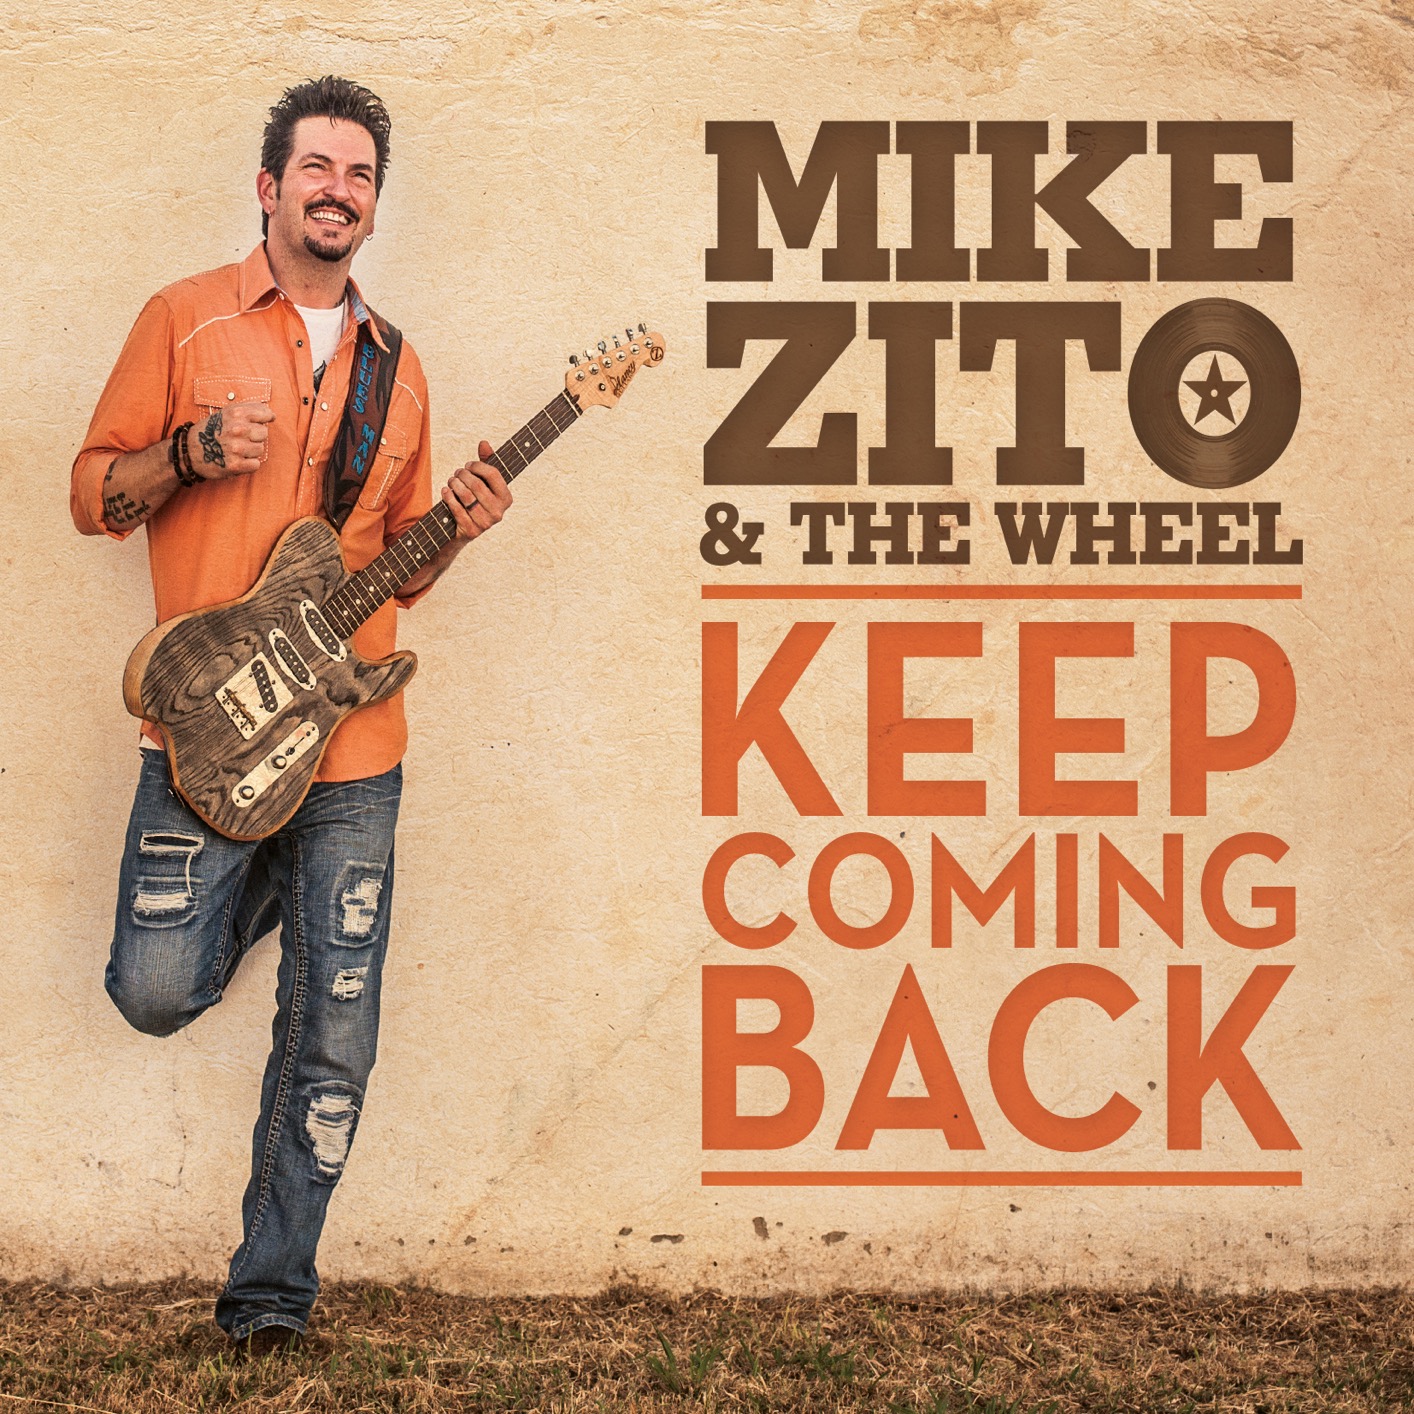 Mike Zito & The Wheel - Keep Coming Back (2015) [FLAC 24bit/48kHz]